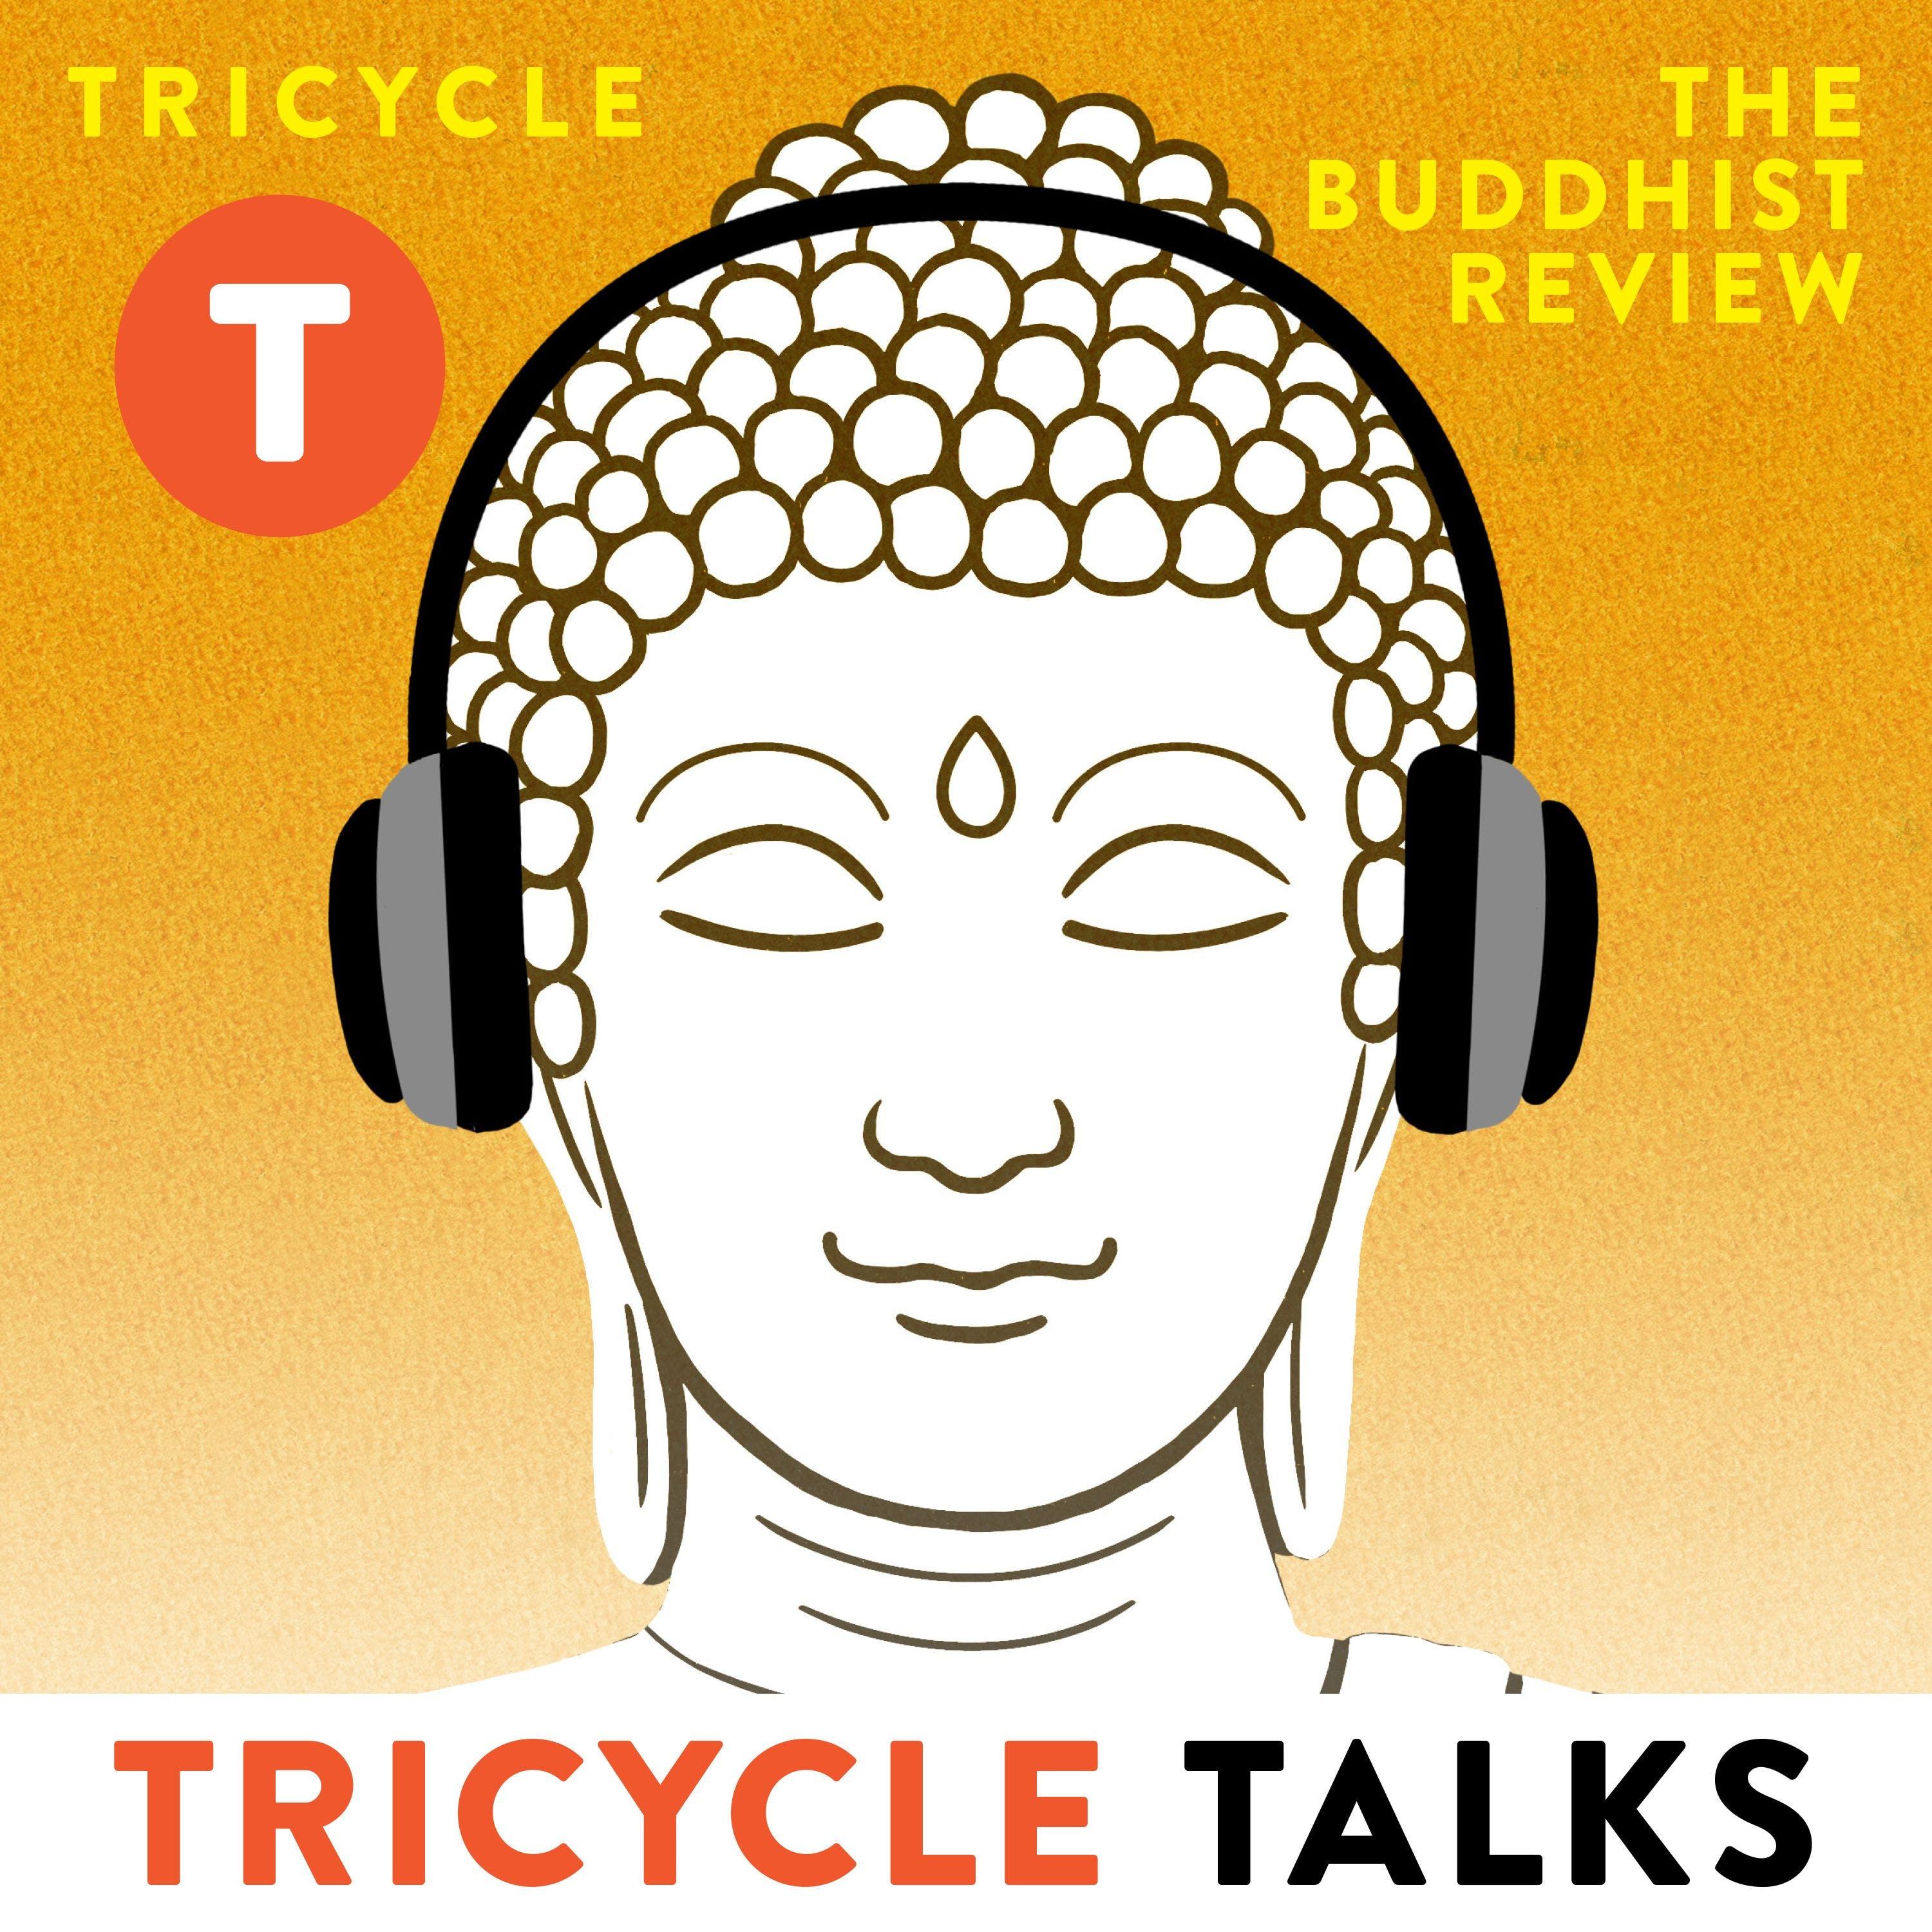 The Power of Mindful Journaling - Tricycle: The Buddhist Review